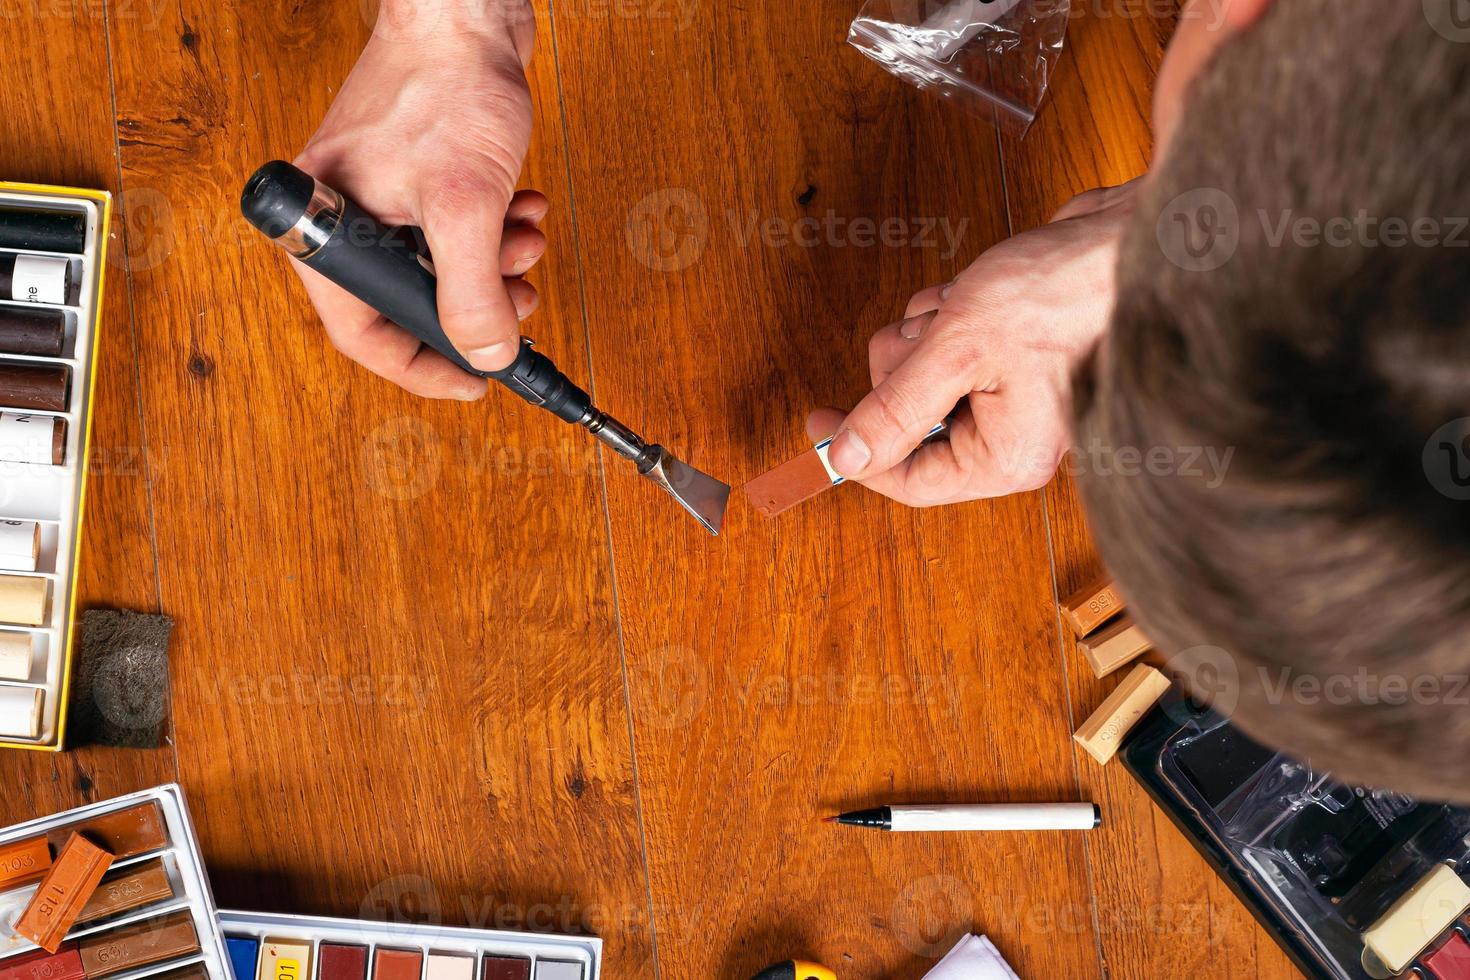 Sealing chips and scratches on the laminate, the master fix a defect on a floor with wax and a soldering iron photo